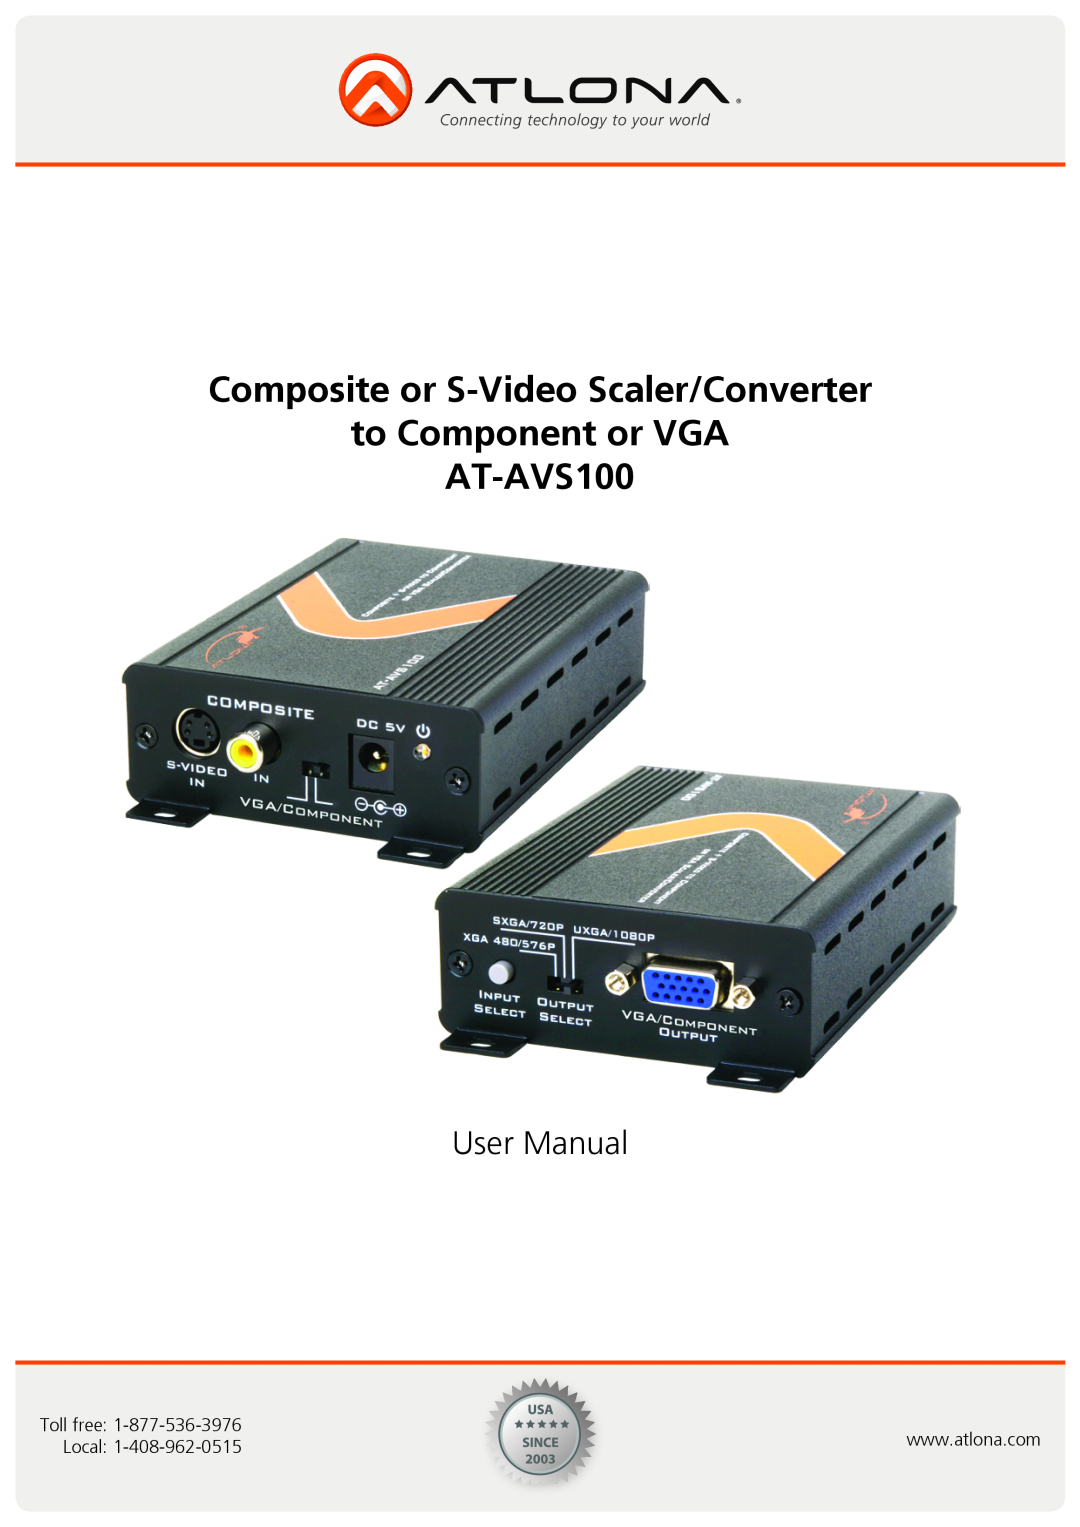 Atlona user manual Composite or S-Video Scaler/Converter to Component or VGA AT-AVS100, User Manual, Toll free, Local 